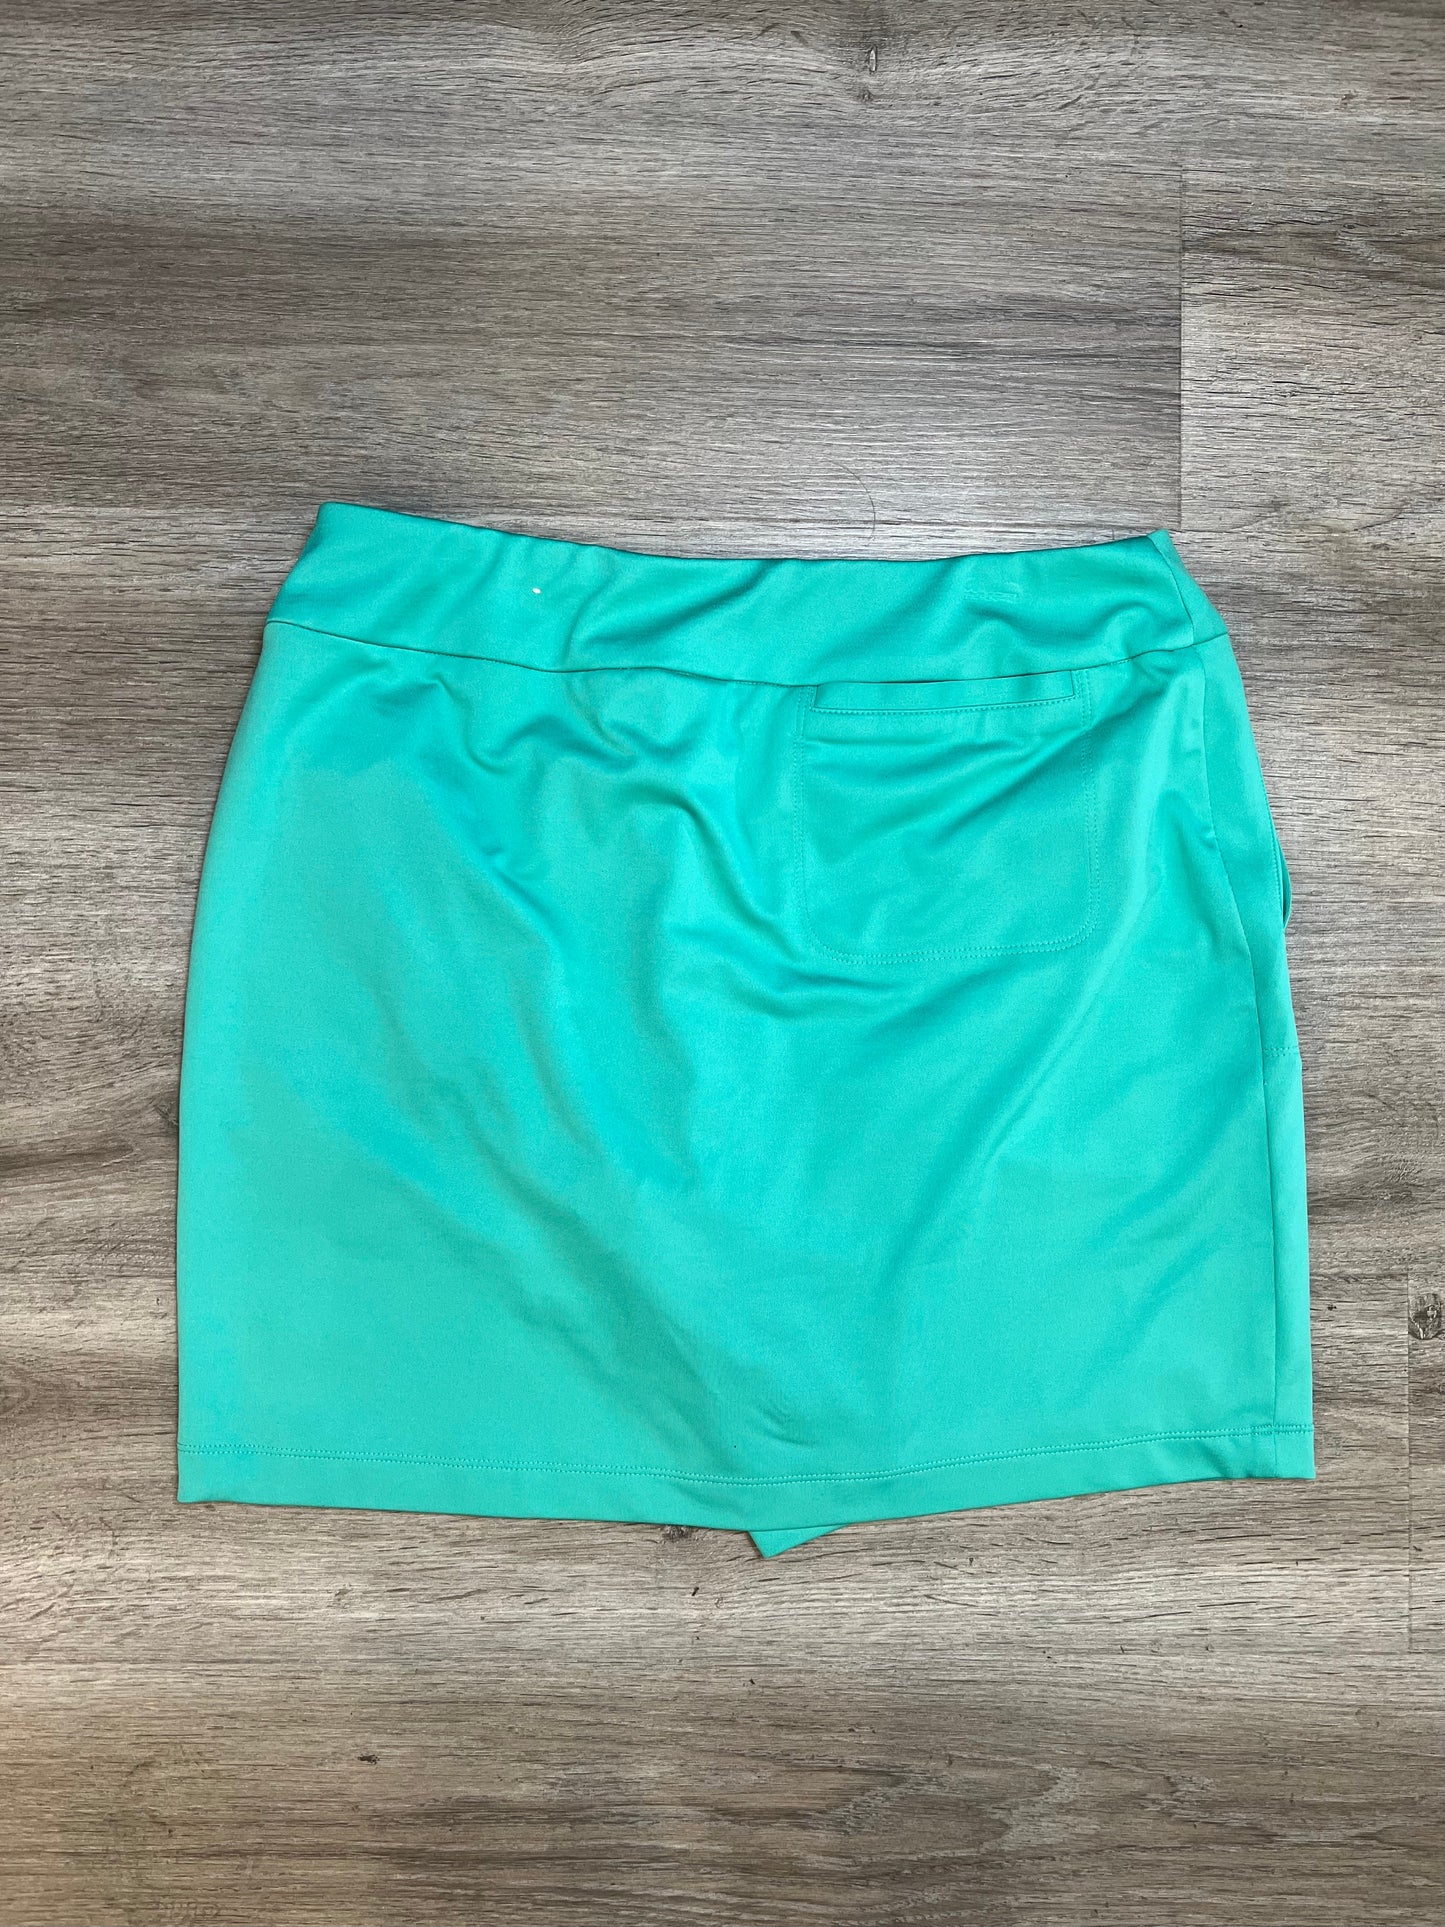 Athletic Skirt Skort By Zenergy By Chicos  Size: M